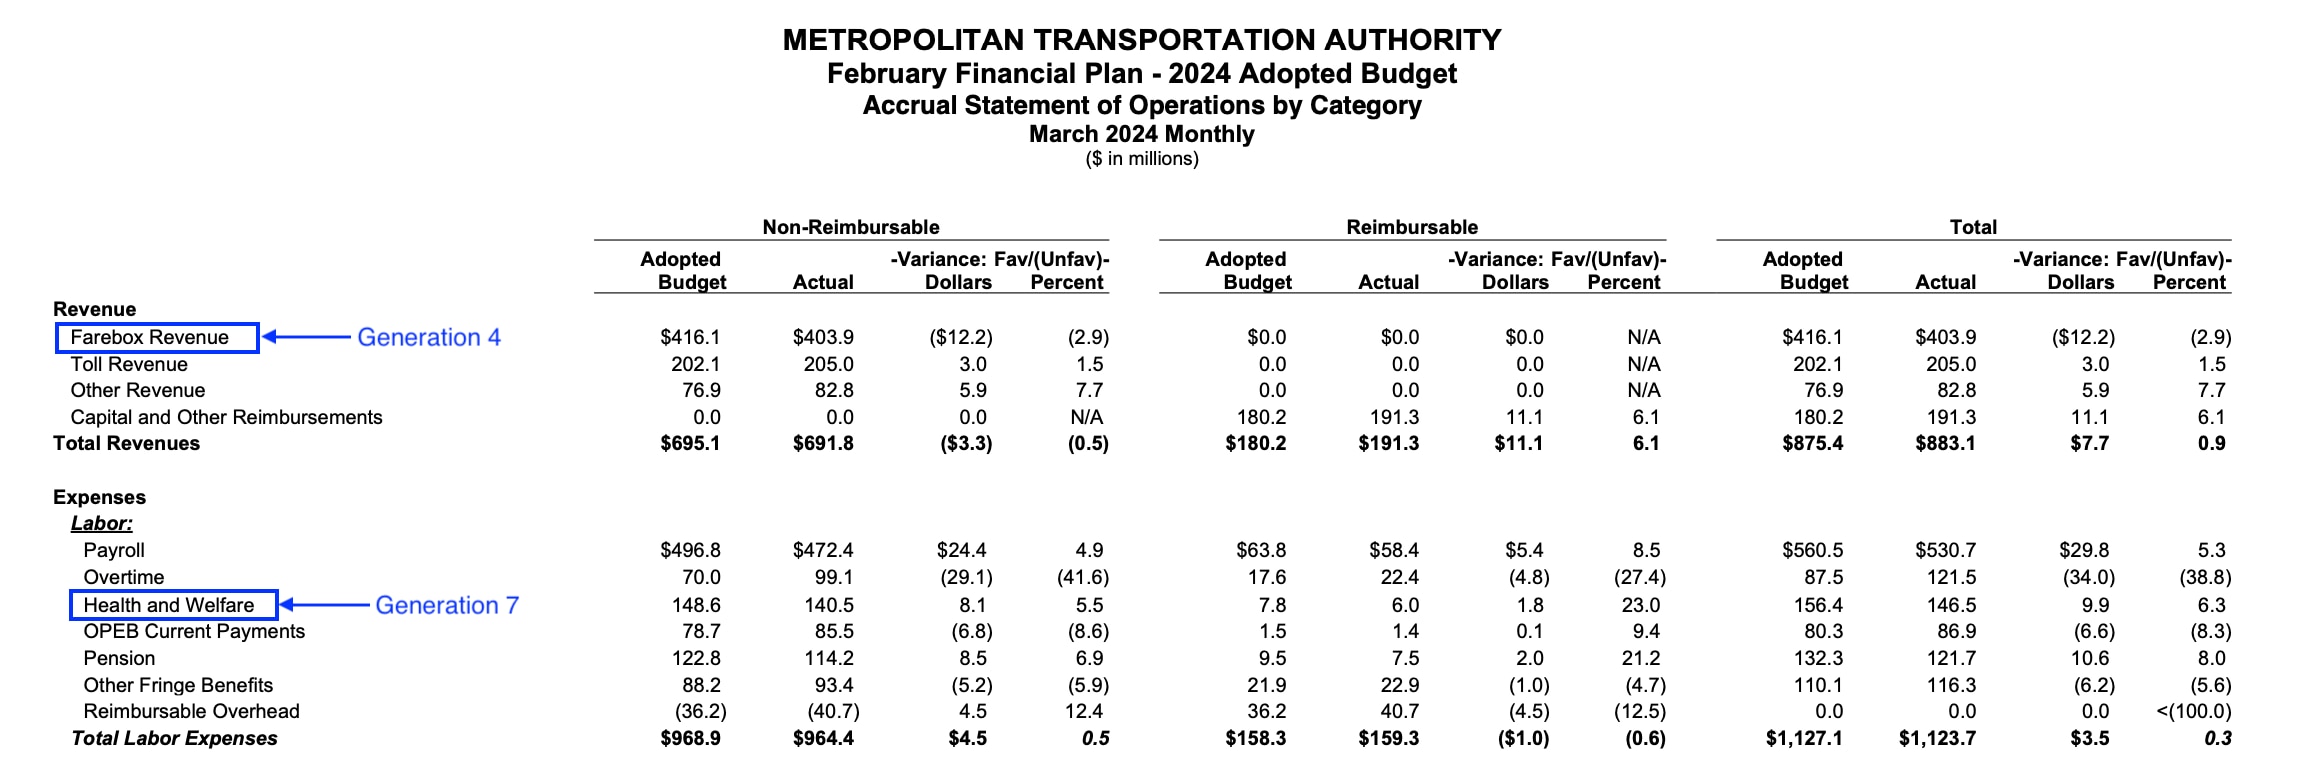 A page from the MTA March 2024 Statement of Operations, showing Farebox Revenue as Generation 4 and Health and Welfare Labor Expenses as Generation 7